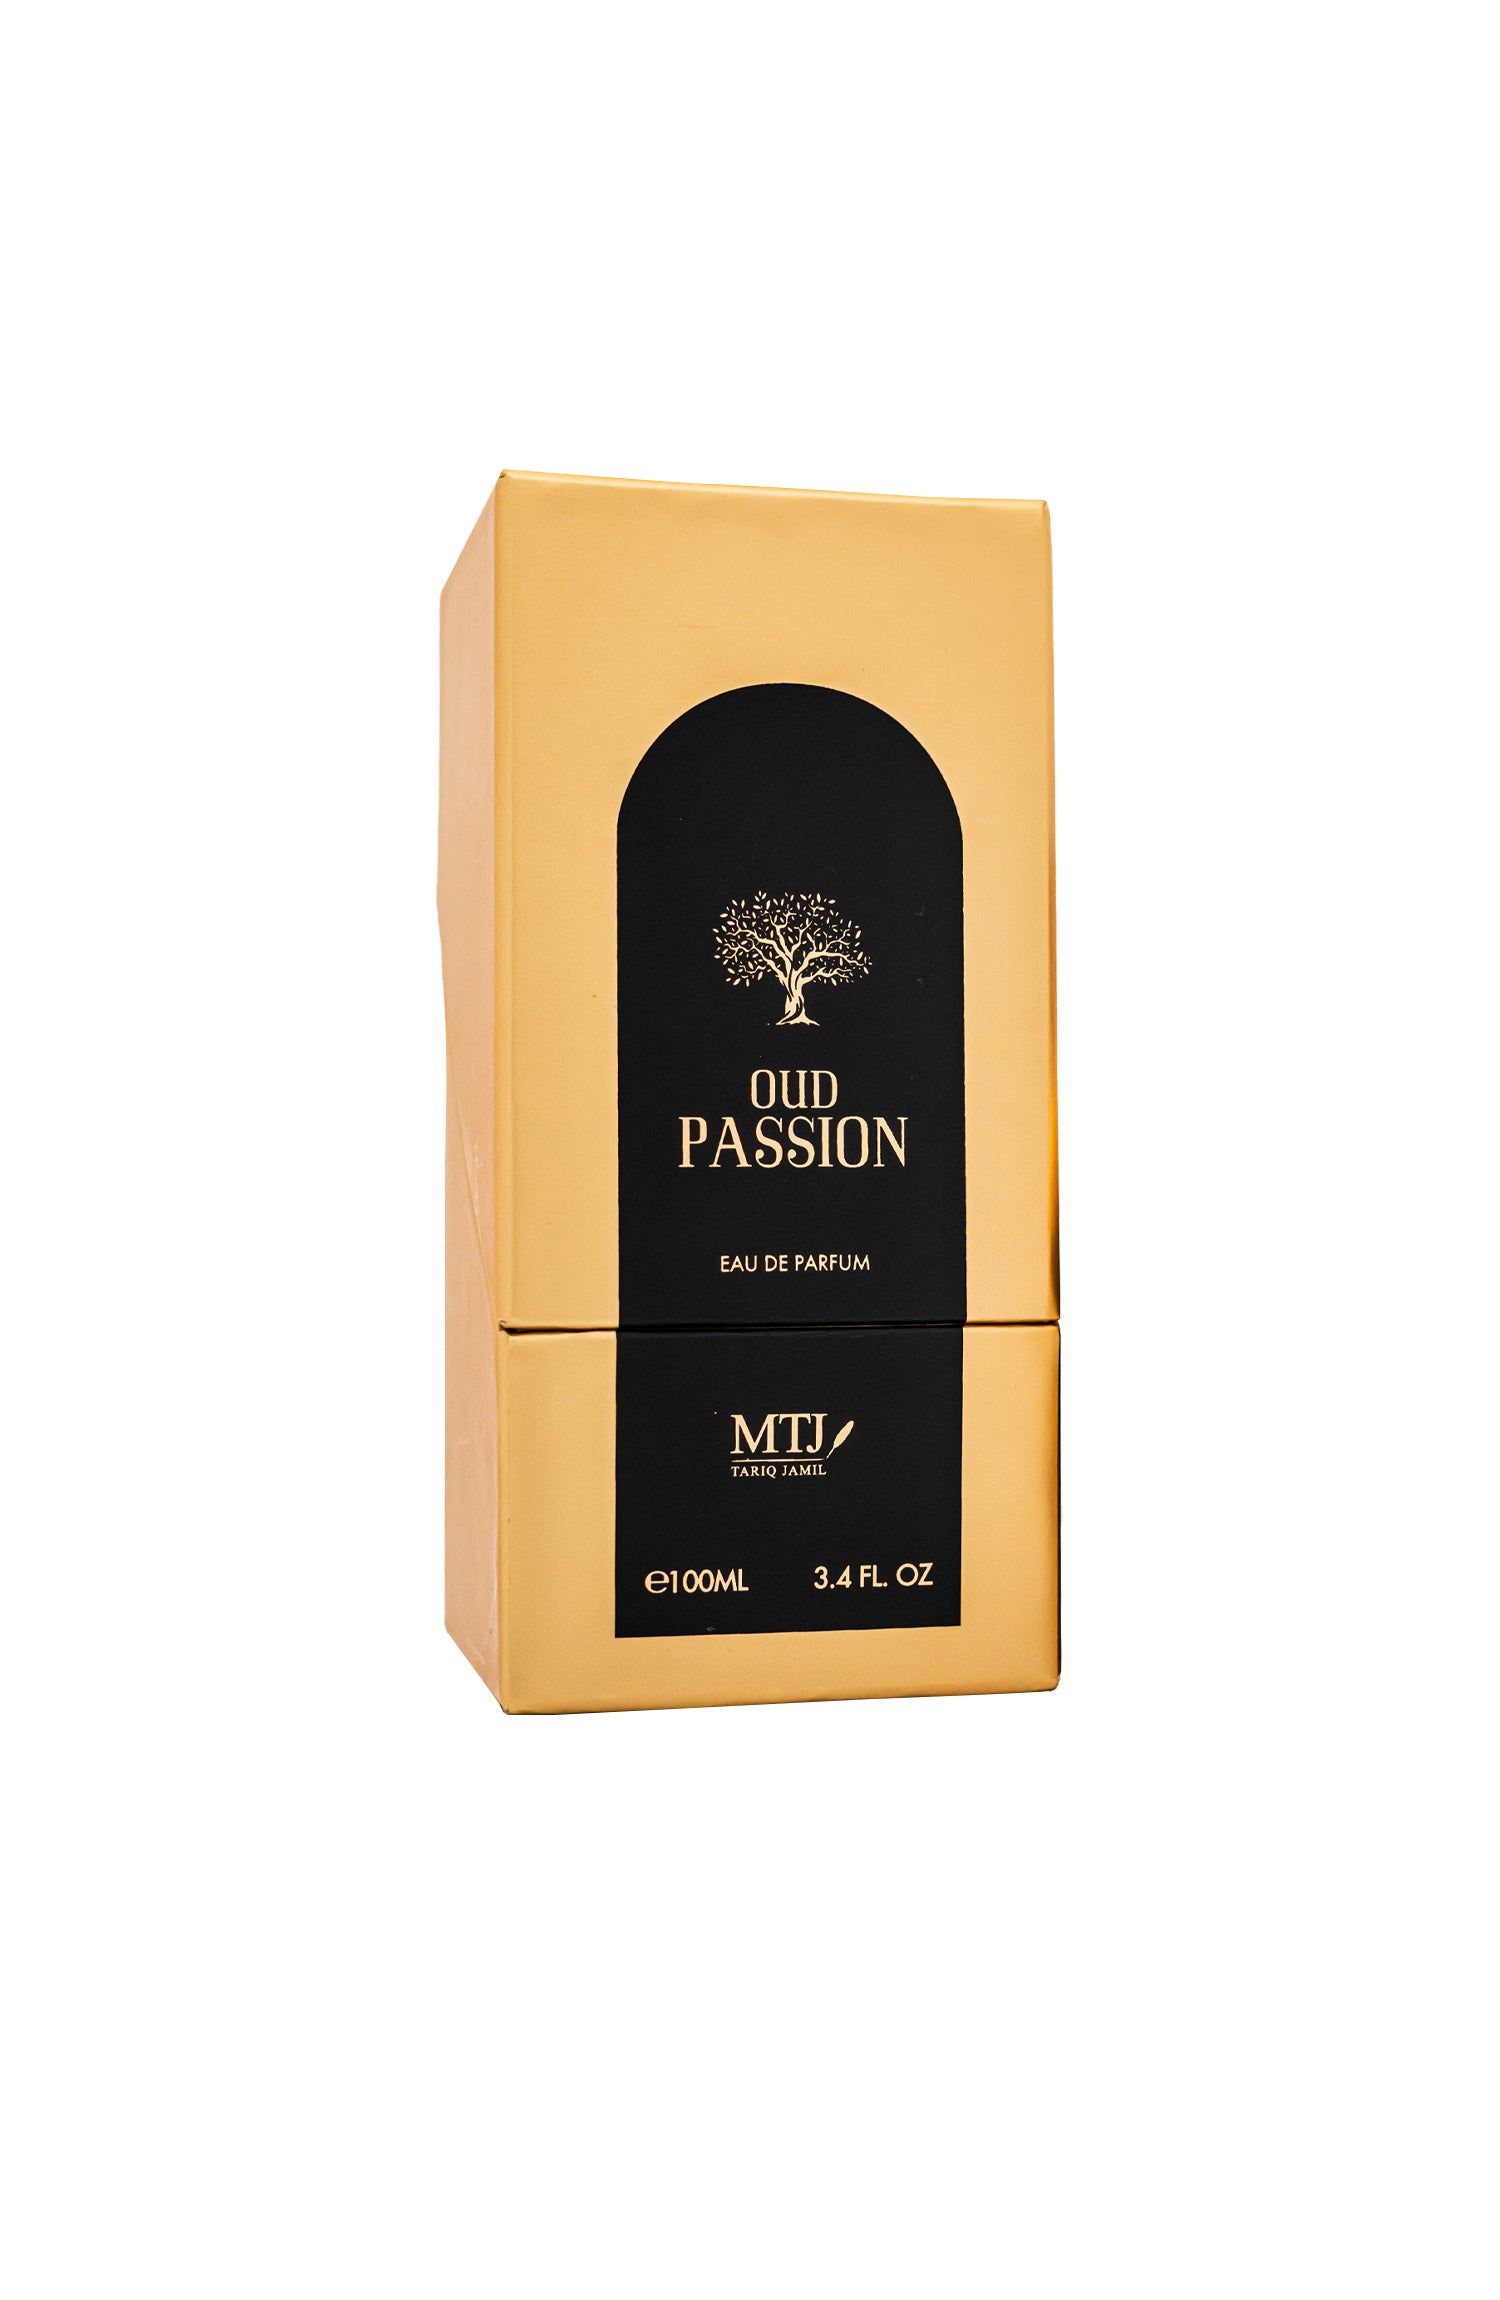 OUD PASSION